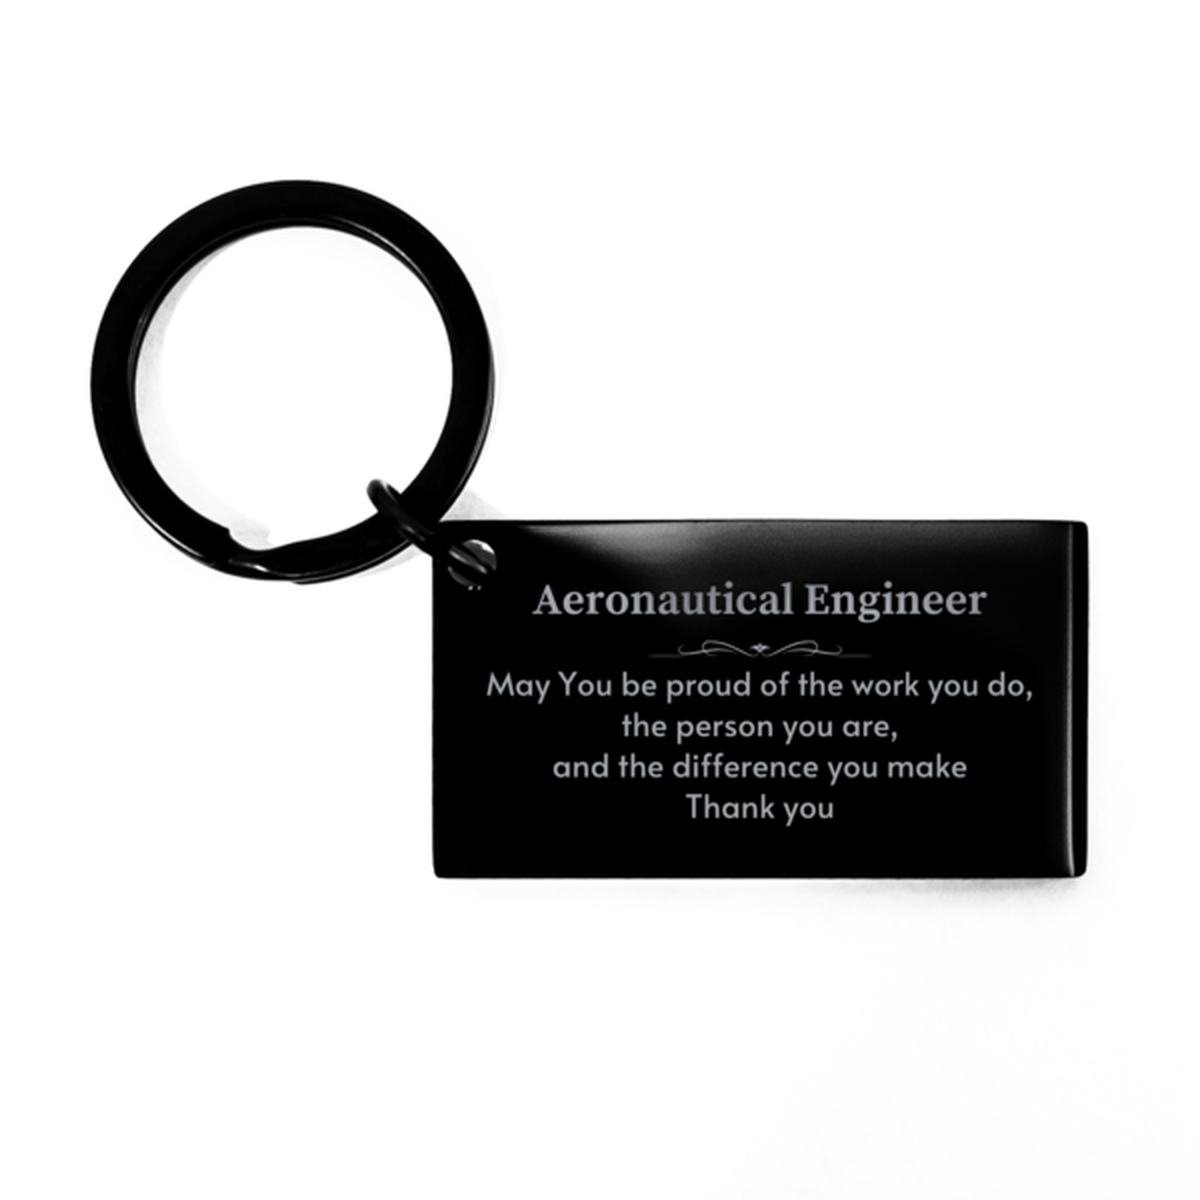 Heartwarming Keychain Retirement Coworkers Gifts for Aeronautical Engineer, Case Manager May You be proud of the work you do, the person you are Gifts for Boss Men Women Friends